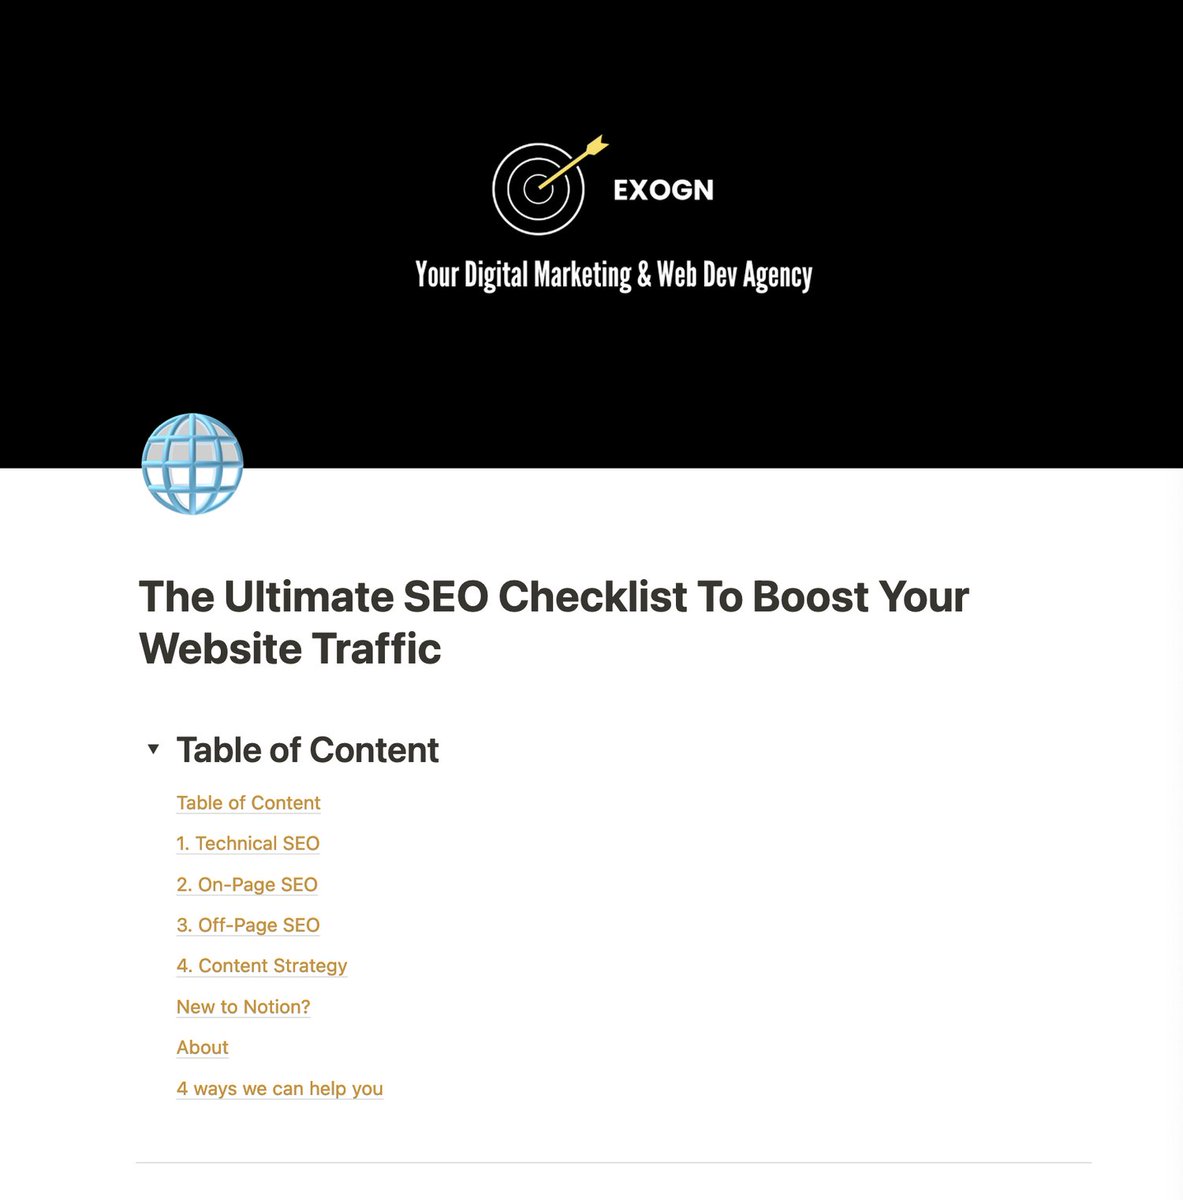 SEO is one of the best organic traffic skills to learn

But, most have no idea the what or how

I put together the ultimate SEO checklist to change that:

- Content
- On-Page SEO
- Off-Page SEO
- Technical SEO

FREE for 24h

Like + Comment 'seo'

(Must be following to get DMs)